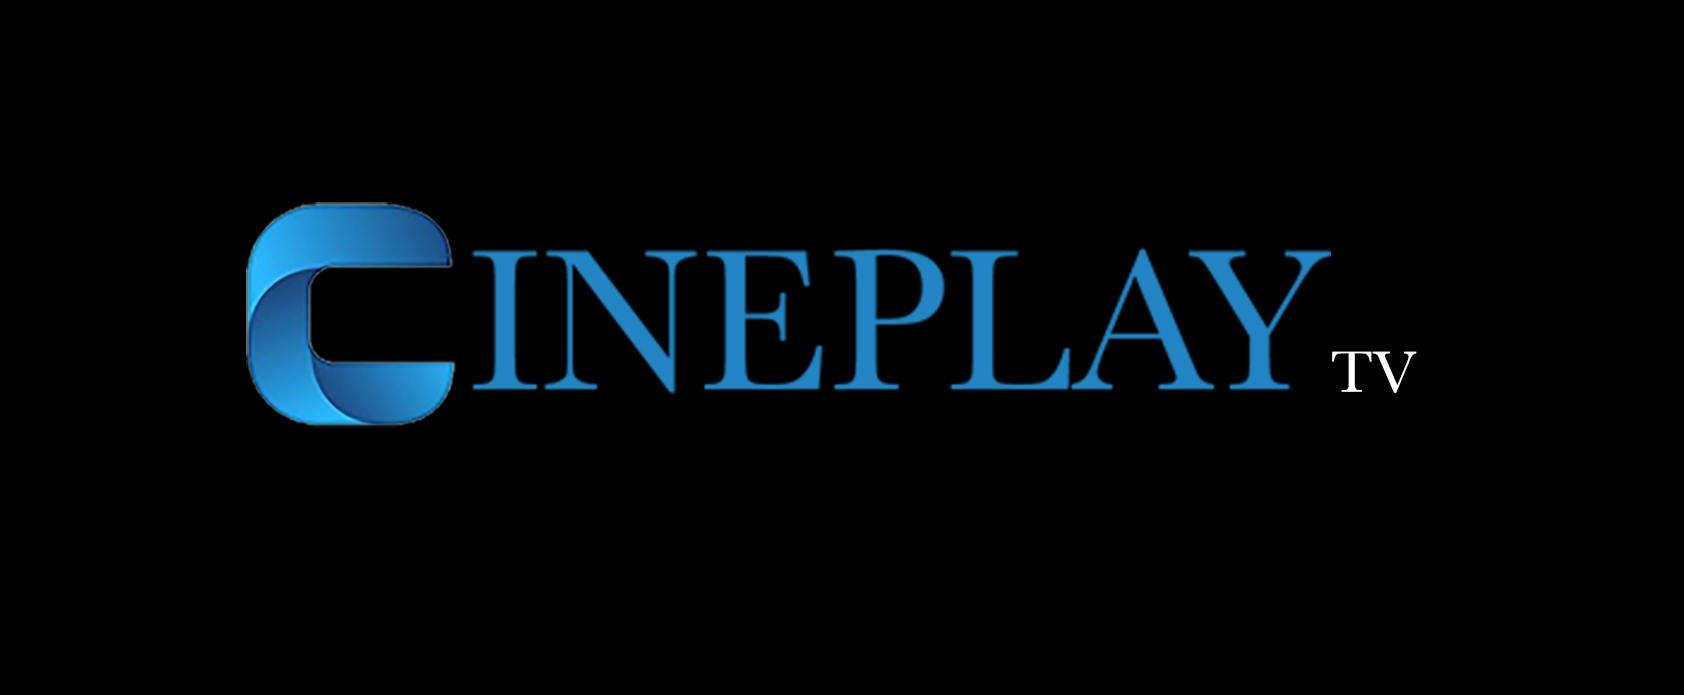 cineplay tv owner